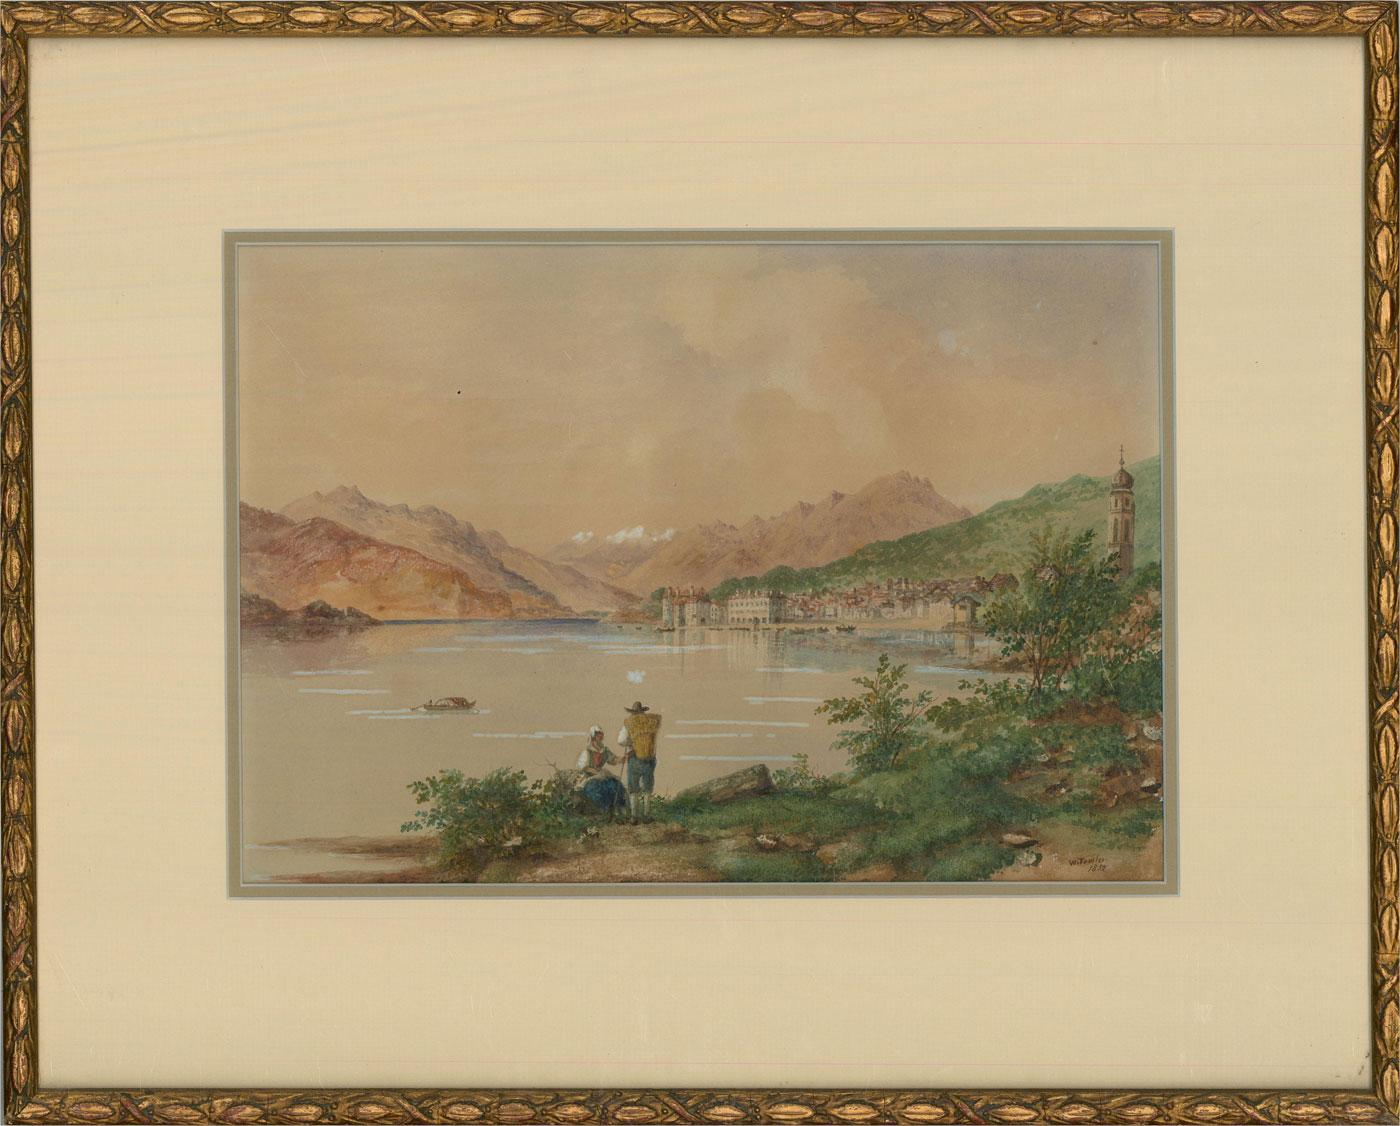 A picturesque view in watercolour and body colour of an Italian lake town with mountains in the distance. Two figures rest in the foreground and rowing boats can be seen out on the water. Presented glazed in a cream and grey double mount and a